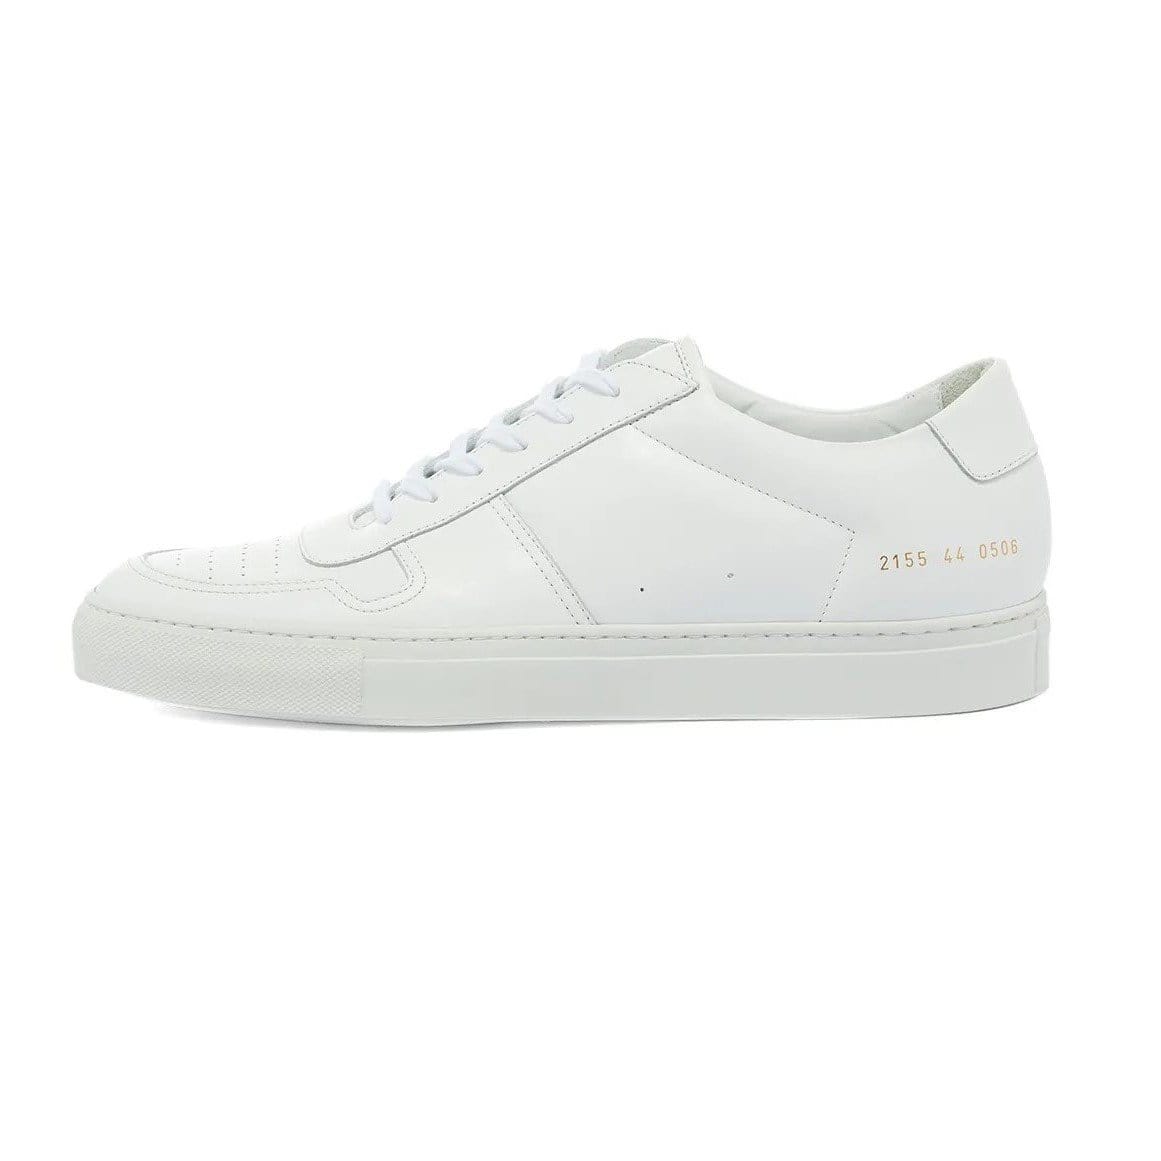 COMMON PROJECTS MAN WHITE SNEAKERS - COMMON PROJECTS - SNEAKERS | Antonioli